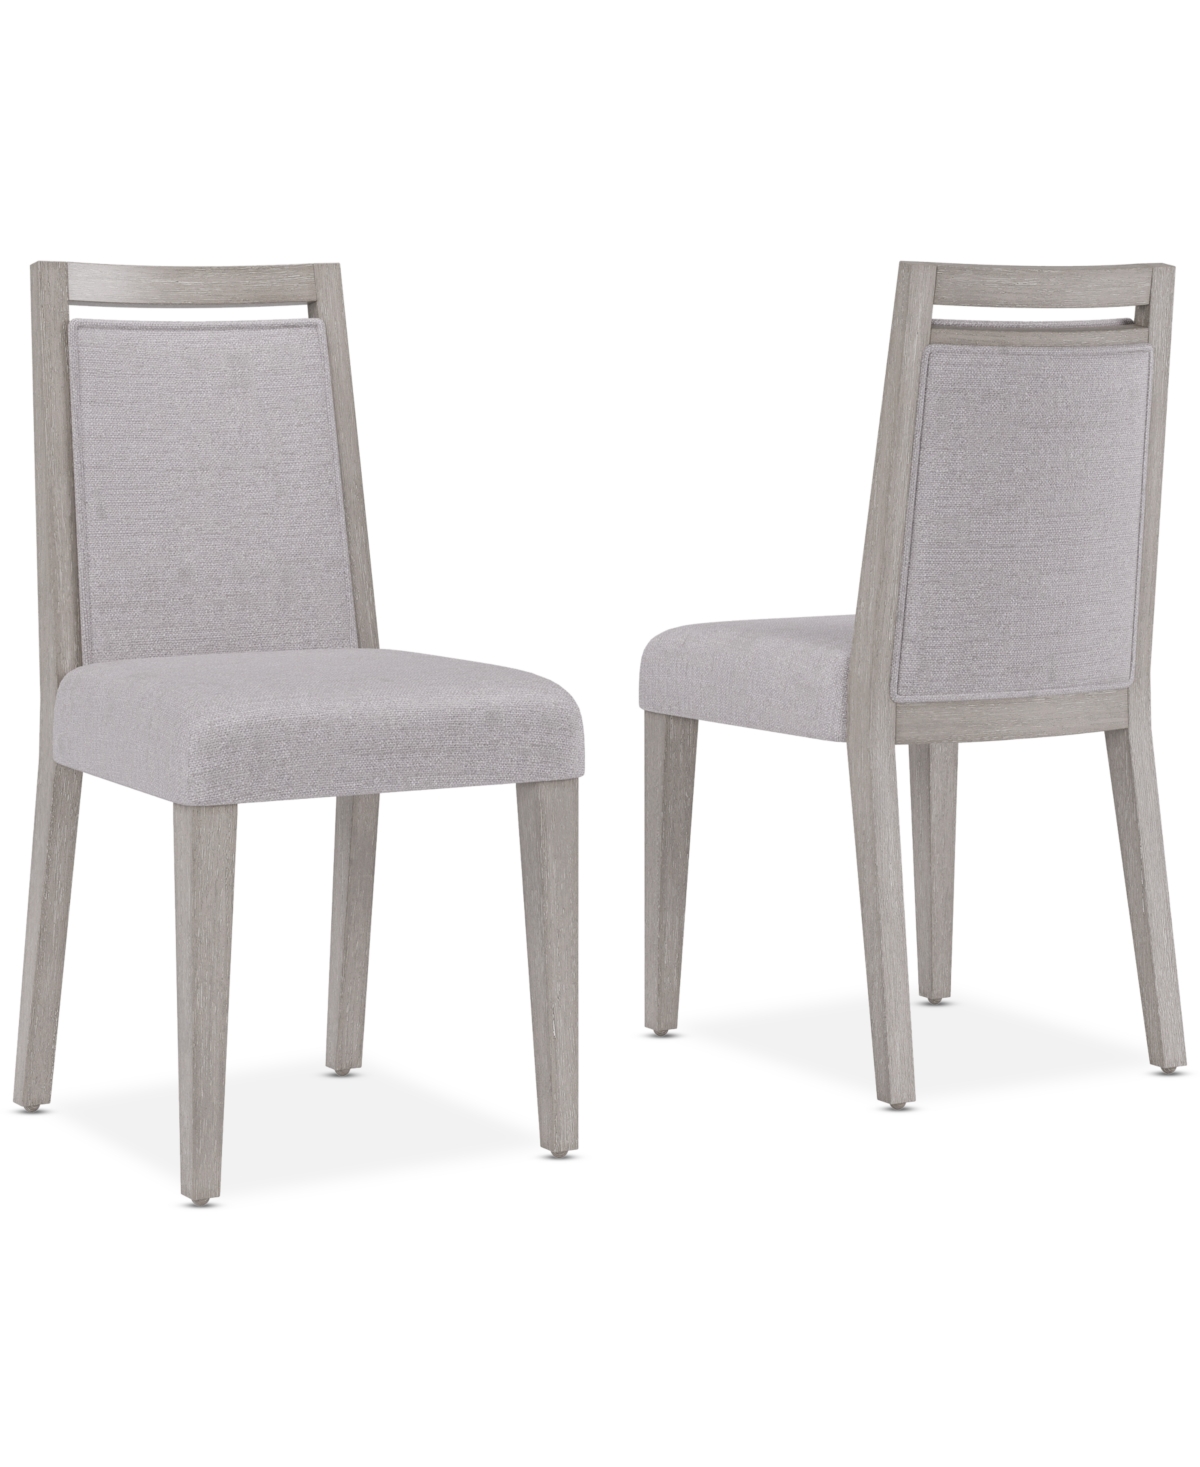 Macy's Tivie 2 Pc Wood Dining Chair Set In Grey